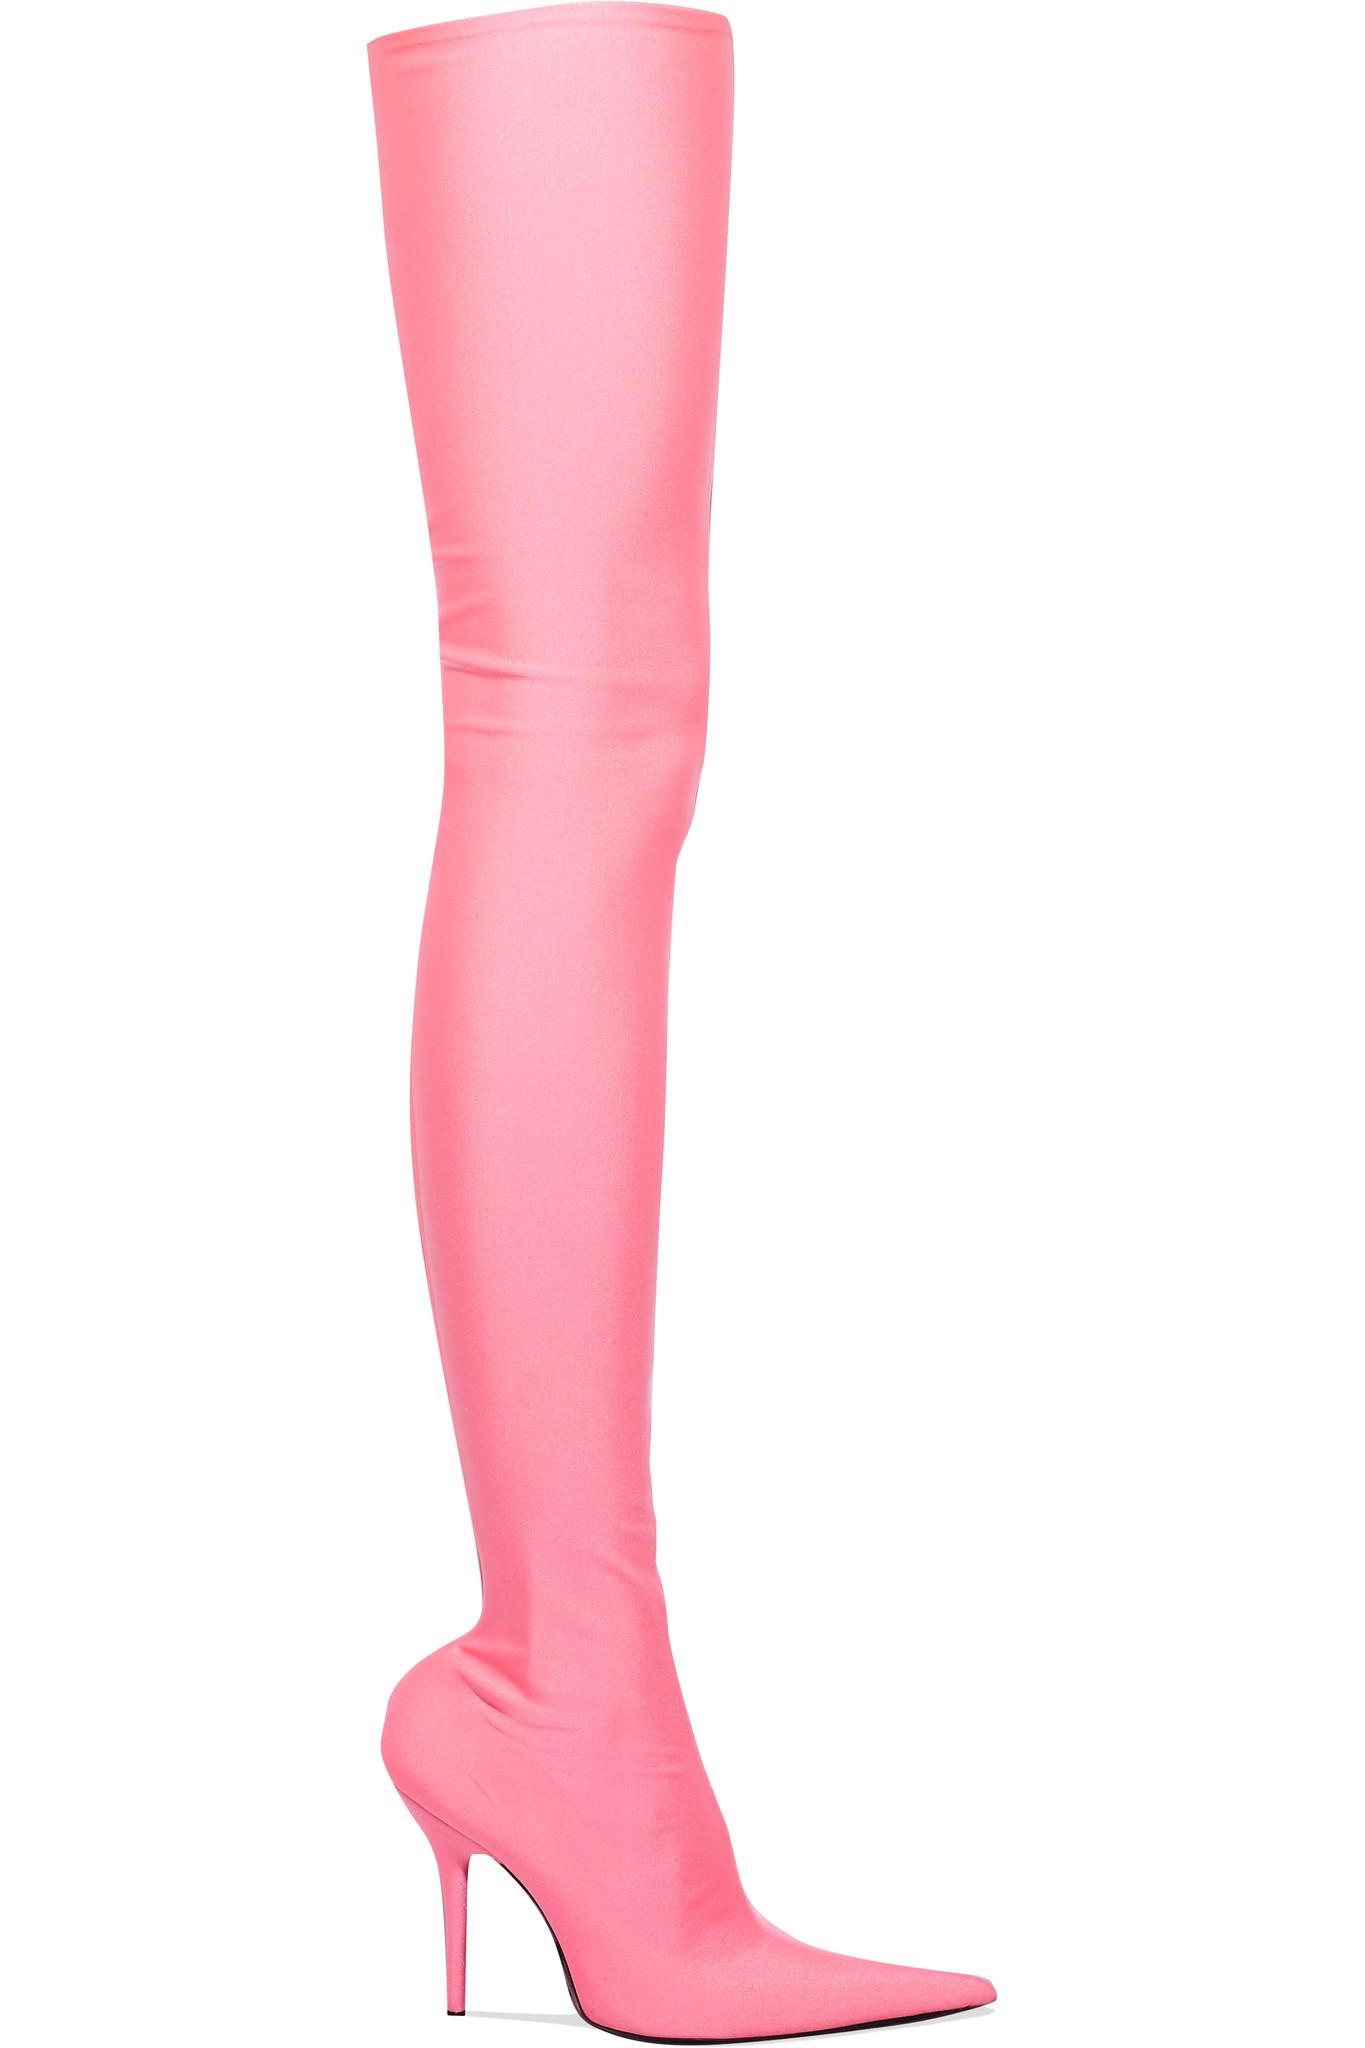 Balenciaga Synthetic Spandex Thigh Boots in Bright Pink (Pink) | Lyst